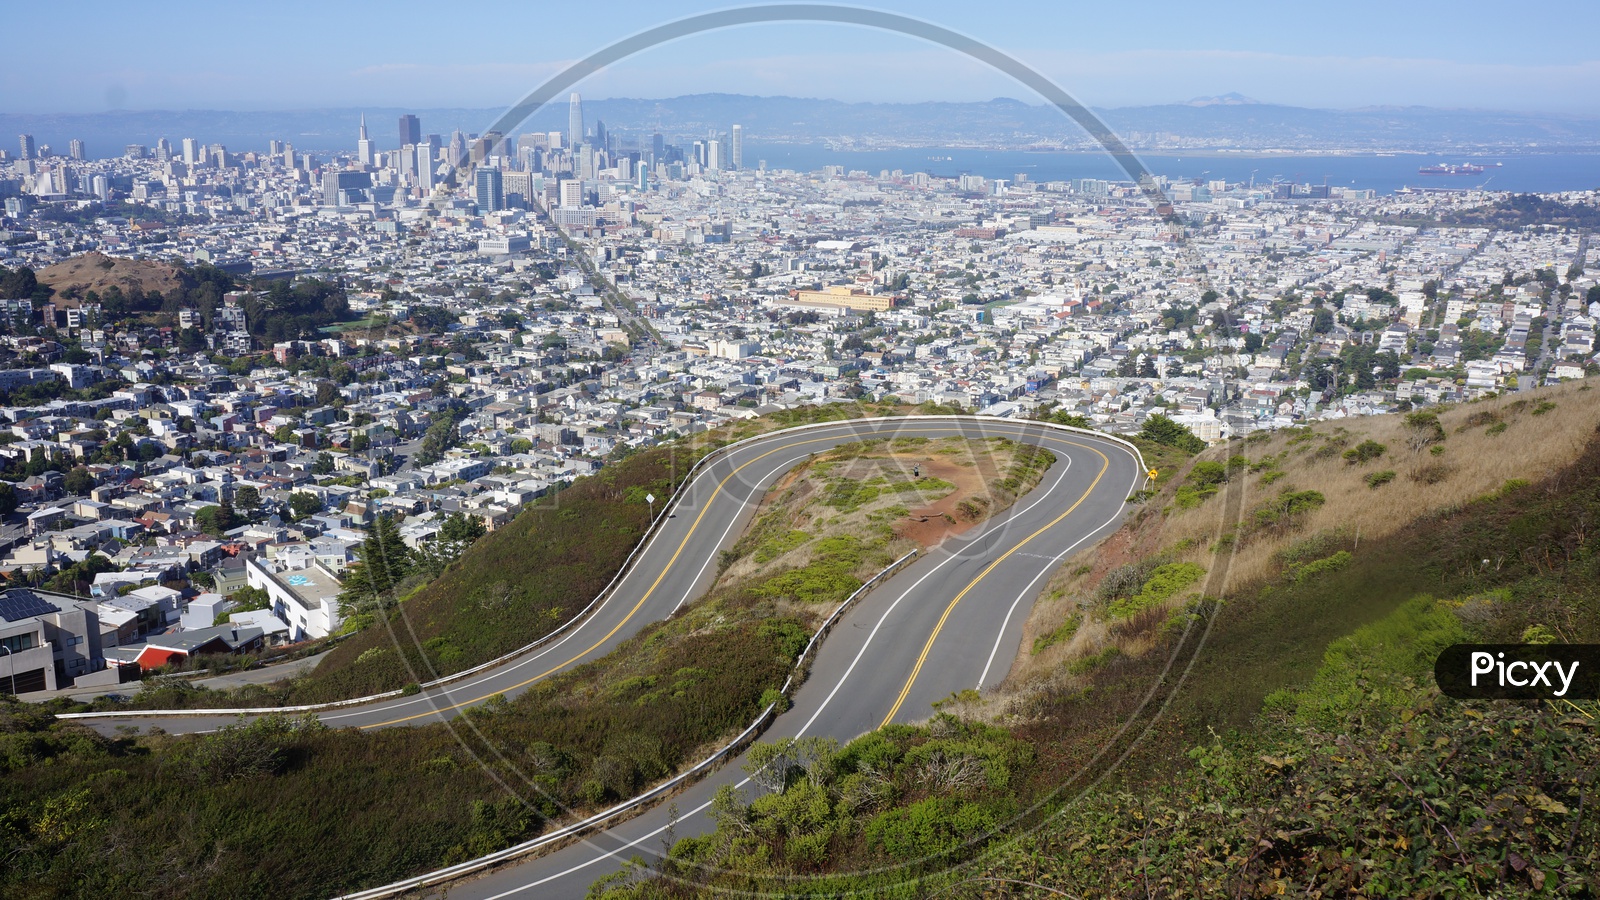 View of downtown San Francisco from Twin Peaks